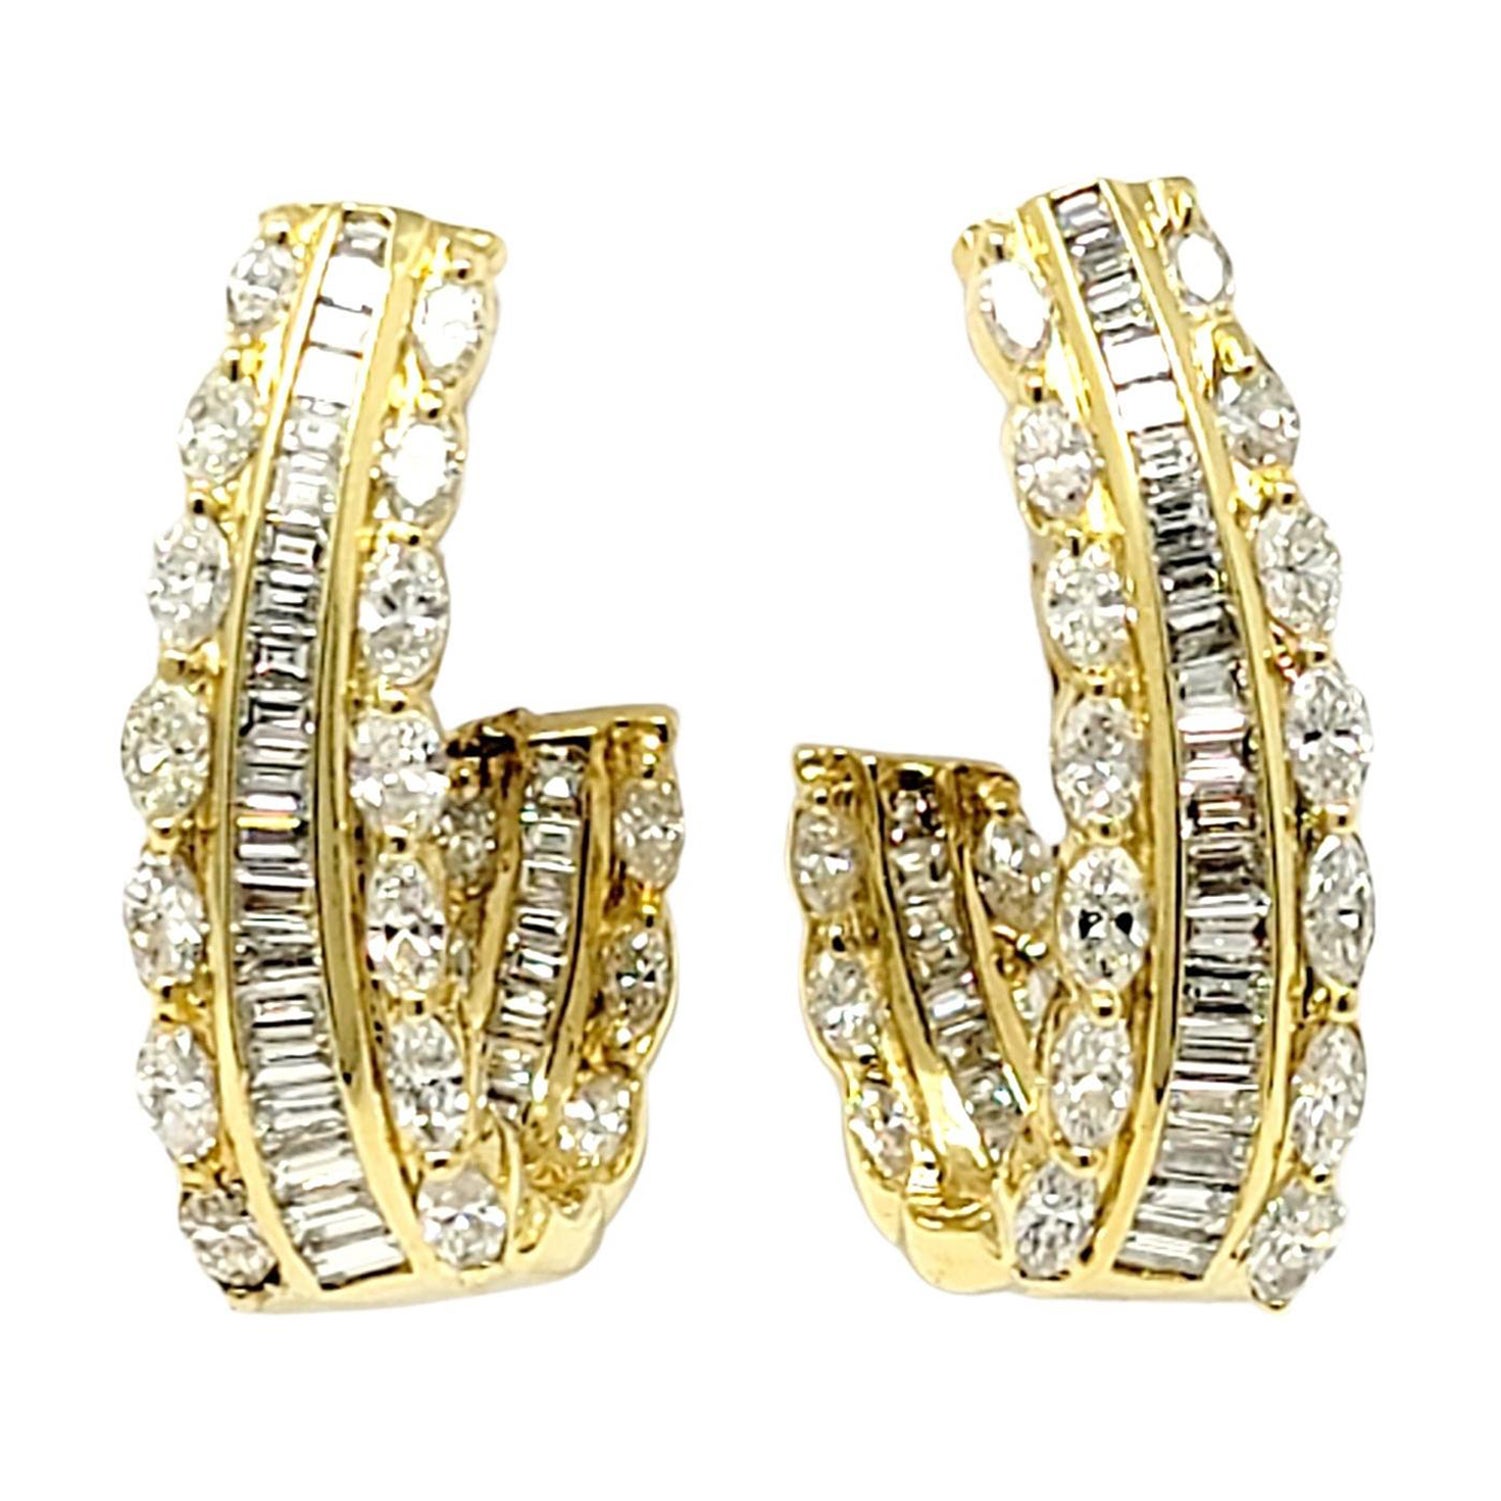  7.15 Carat Total Marquis and Baguette Pave Diamond Half Hoop Gold Earrings For Sale